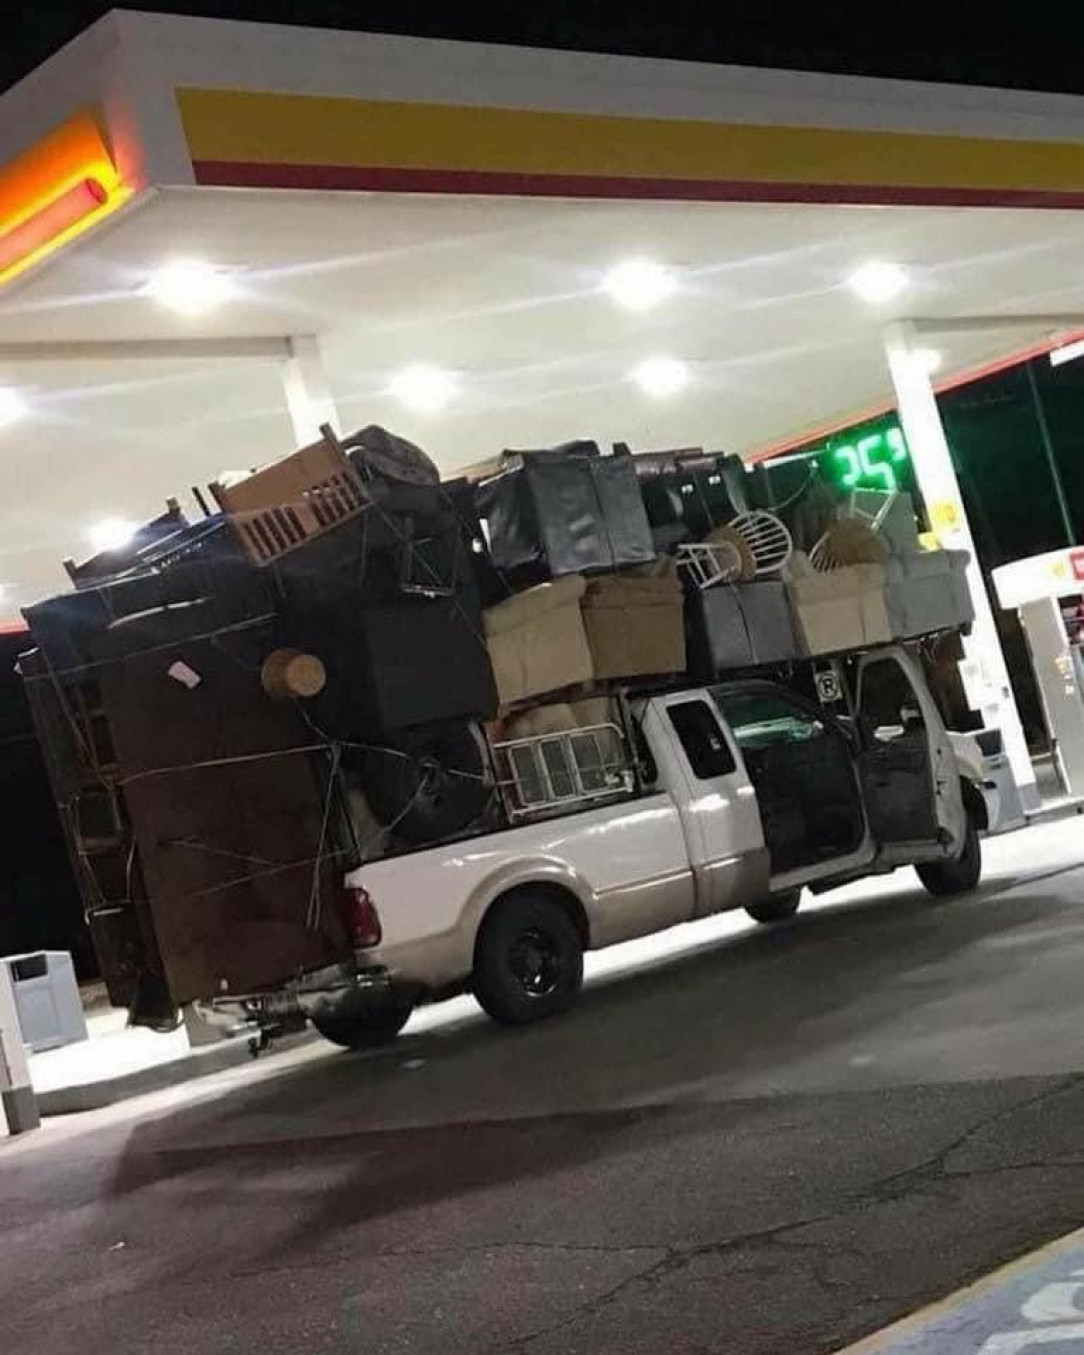 Massively overpacked pickup truck